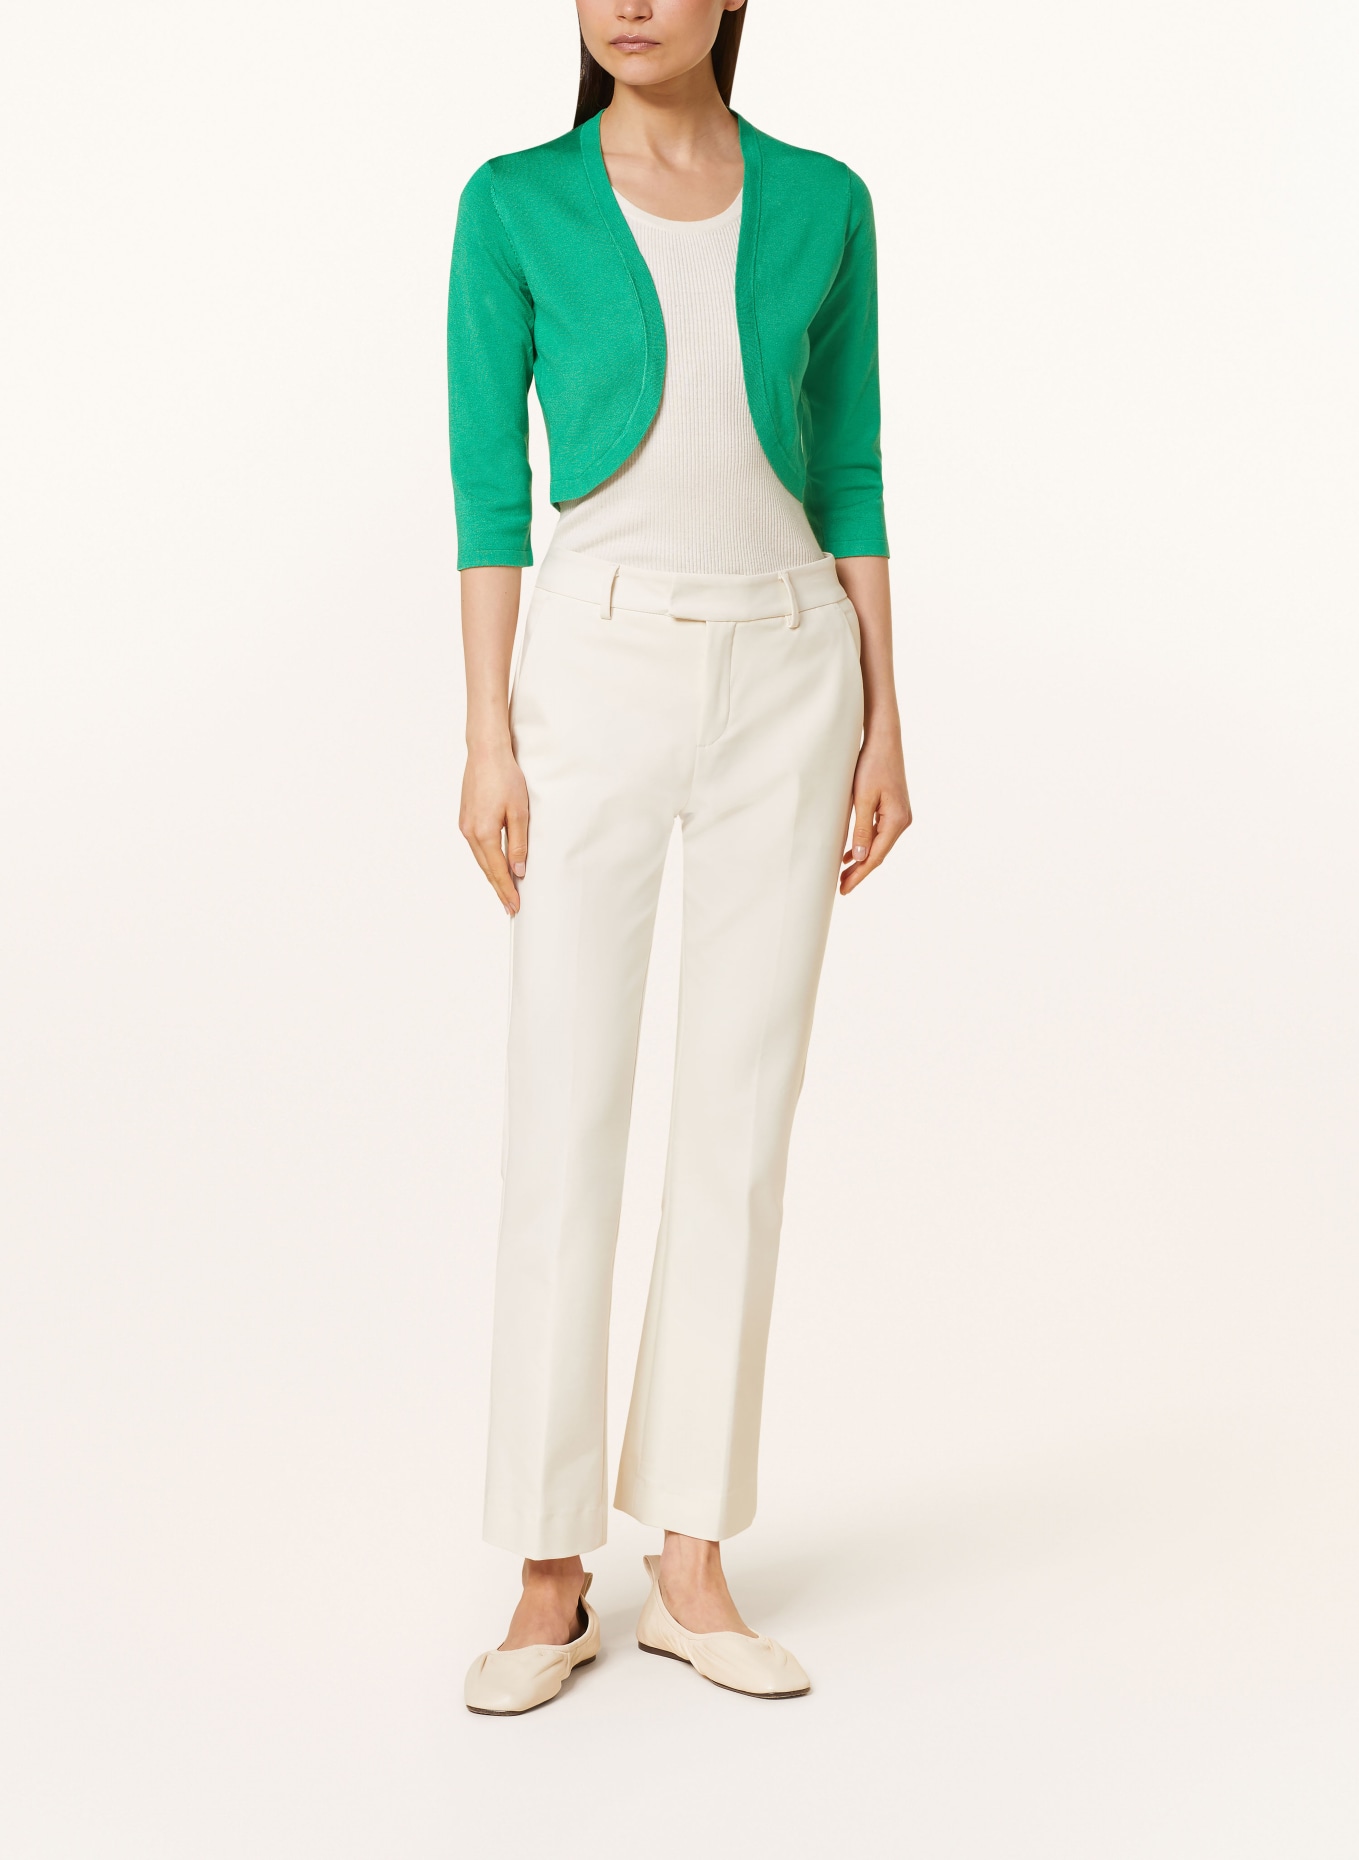 HOBBS Knit bolero CARRIE with 3/4 sleeves, Color: GREEN (Image 2)